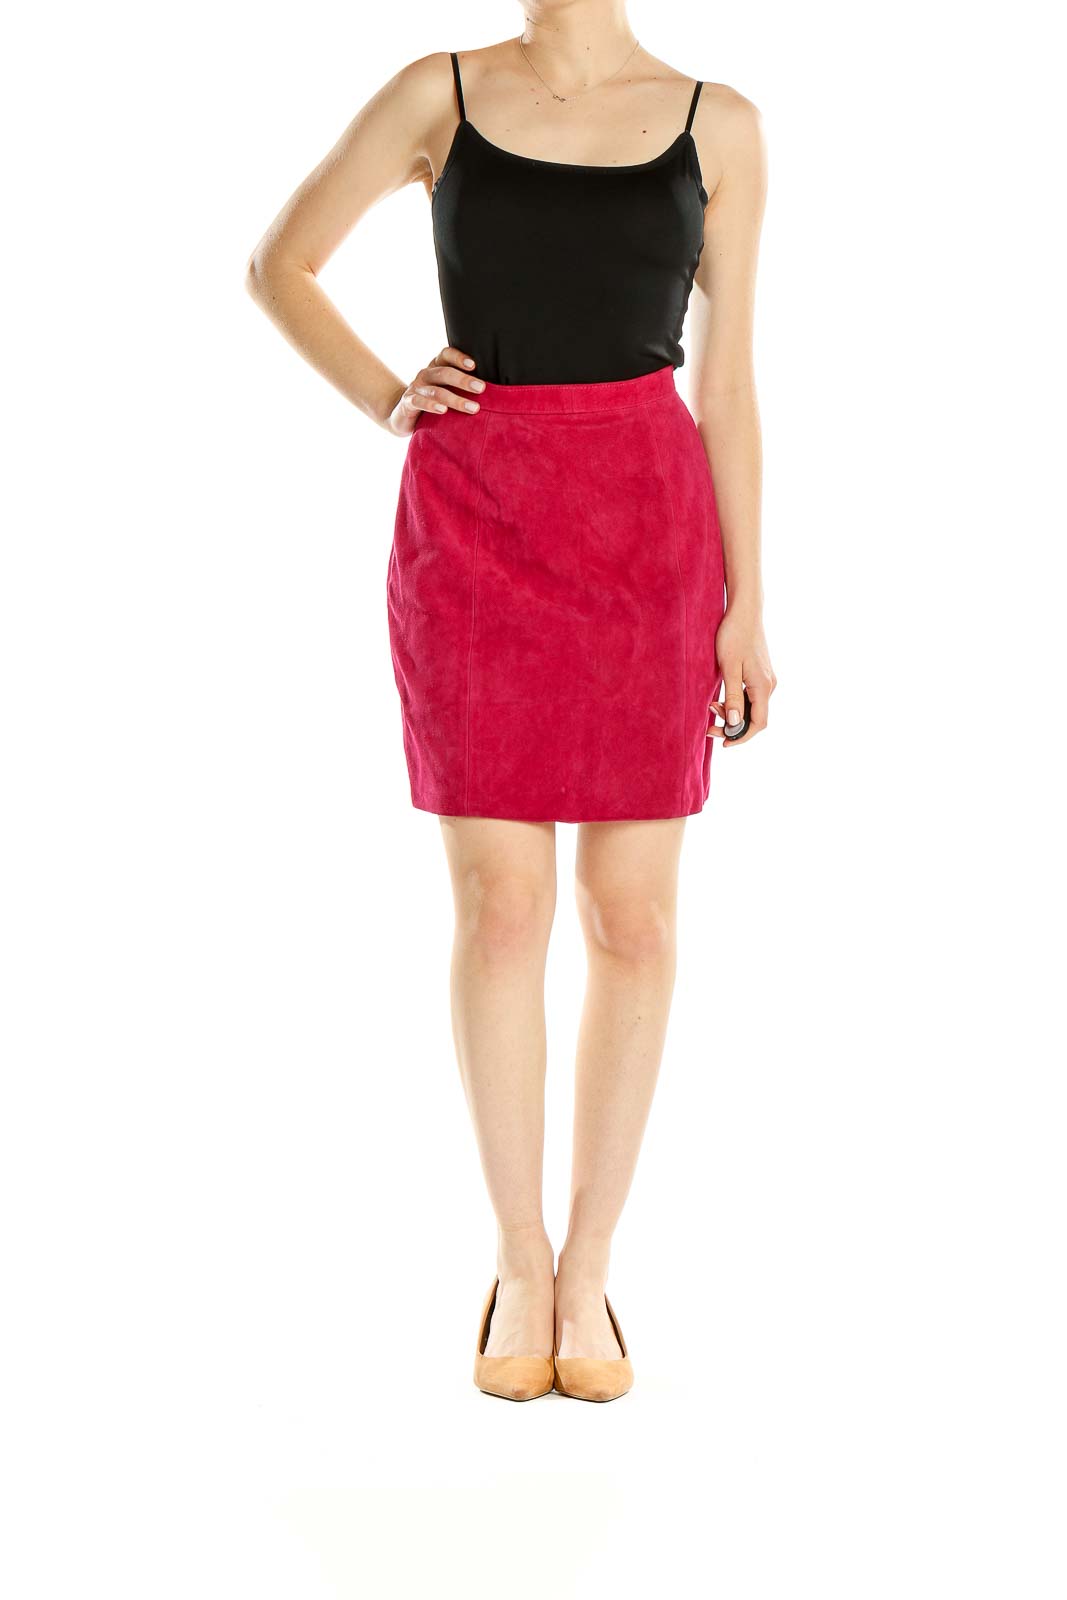 Red Chic Pencil Skirt Front